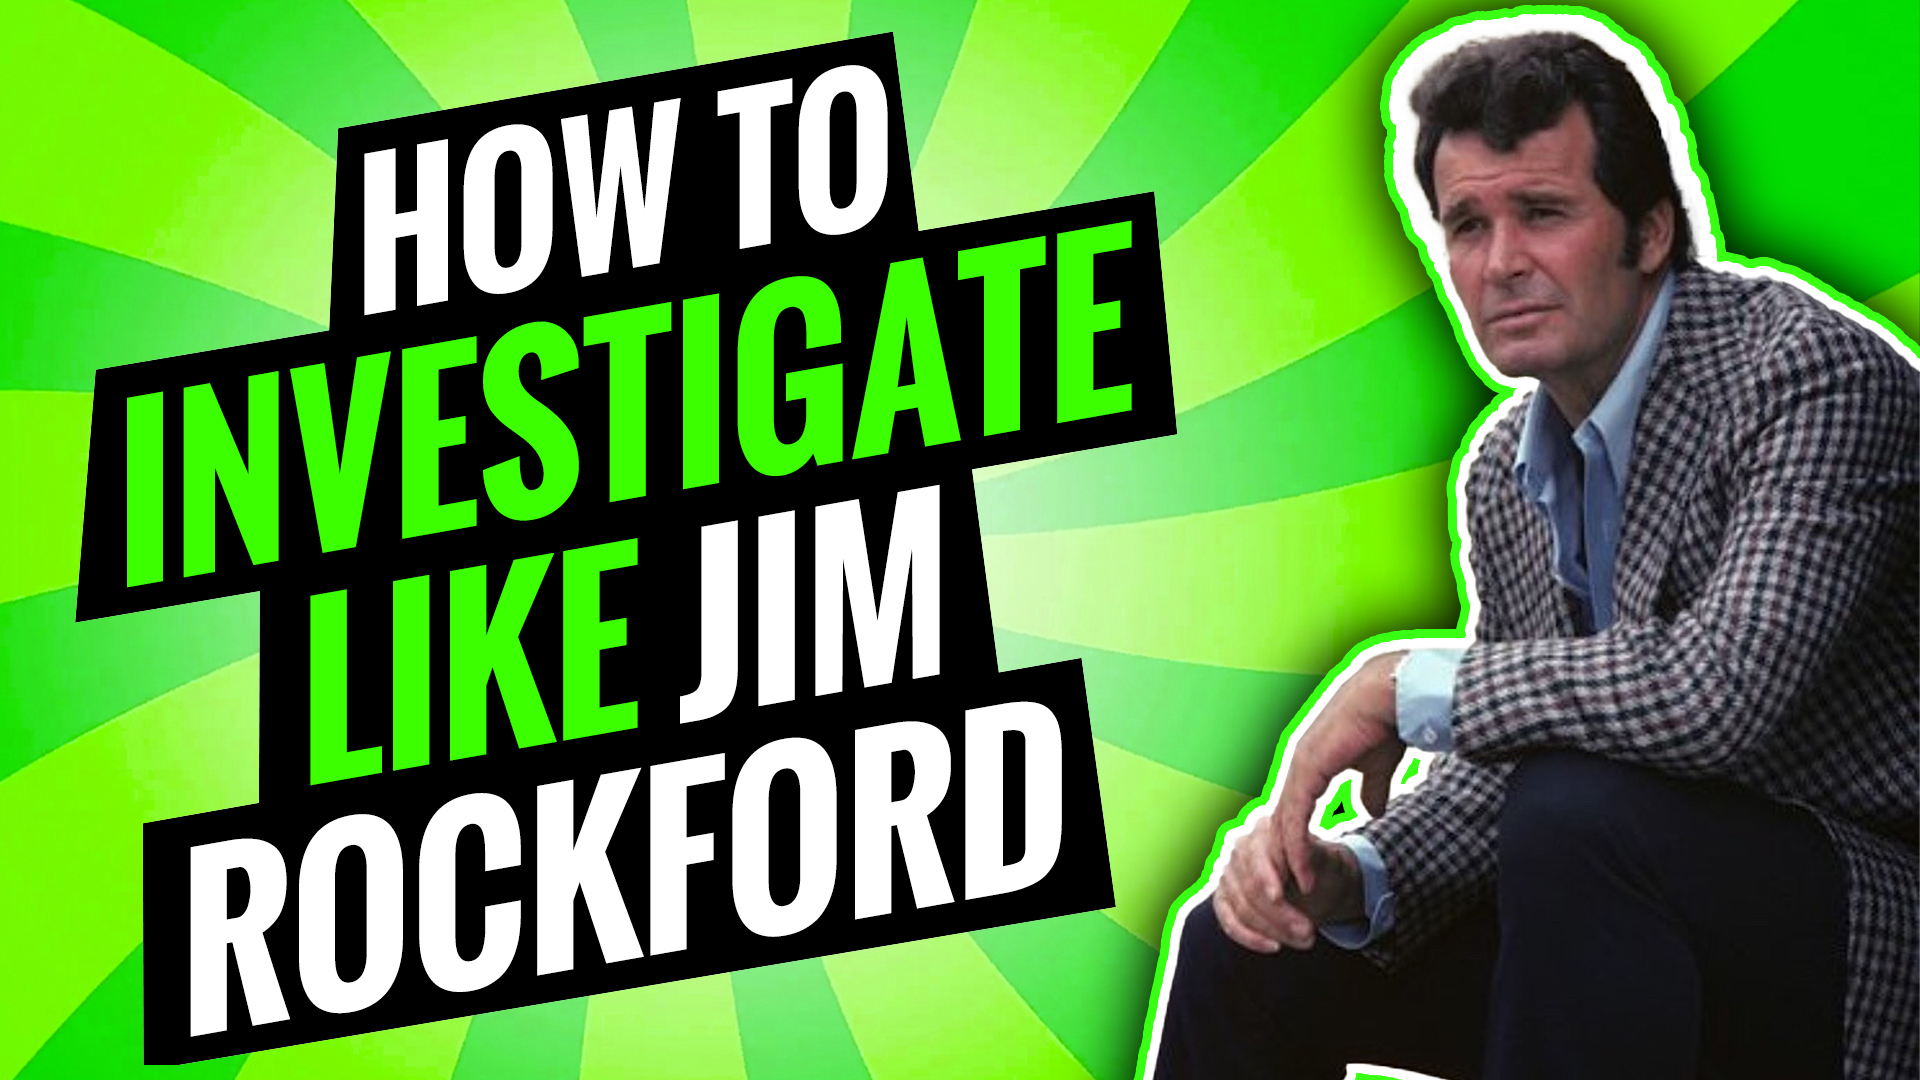 How to Investigate Like Jim Rockford [VIDEO]